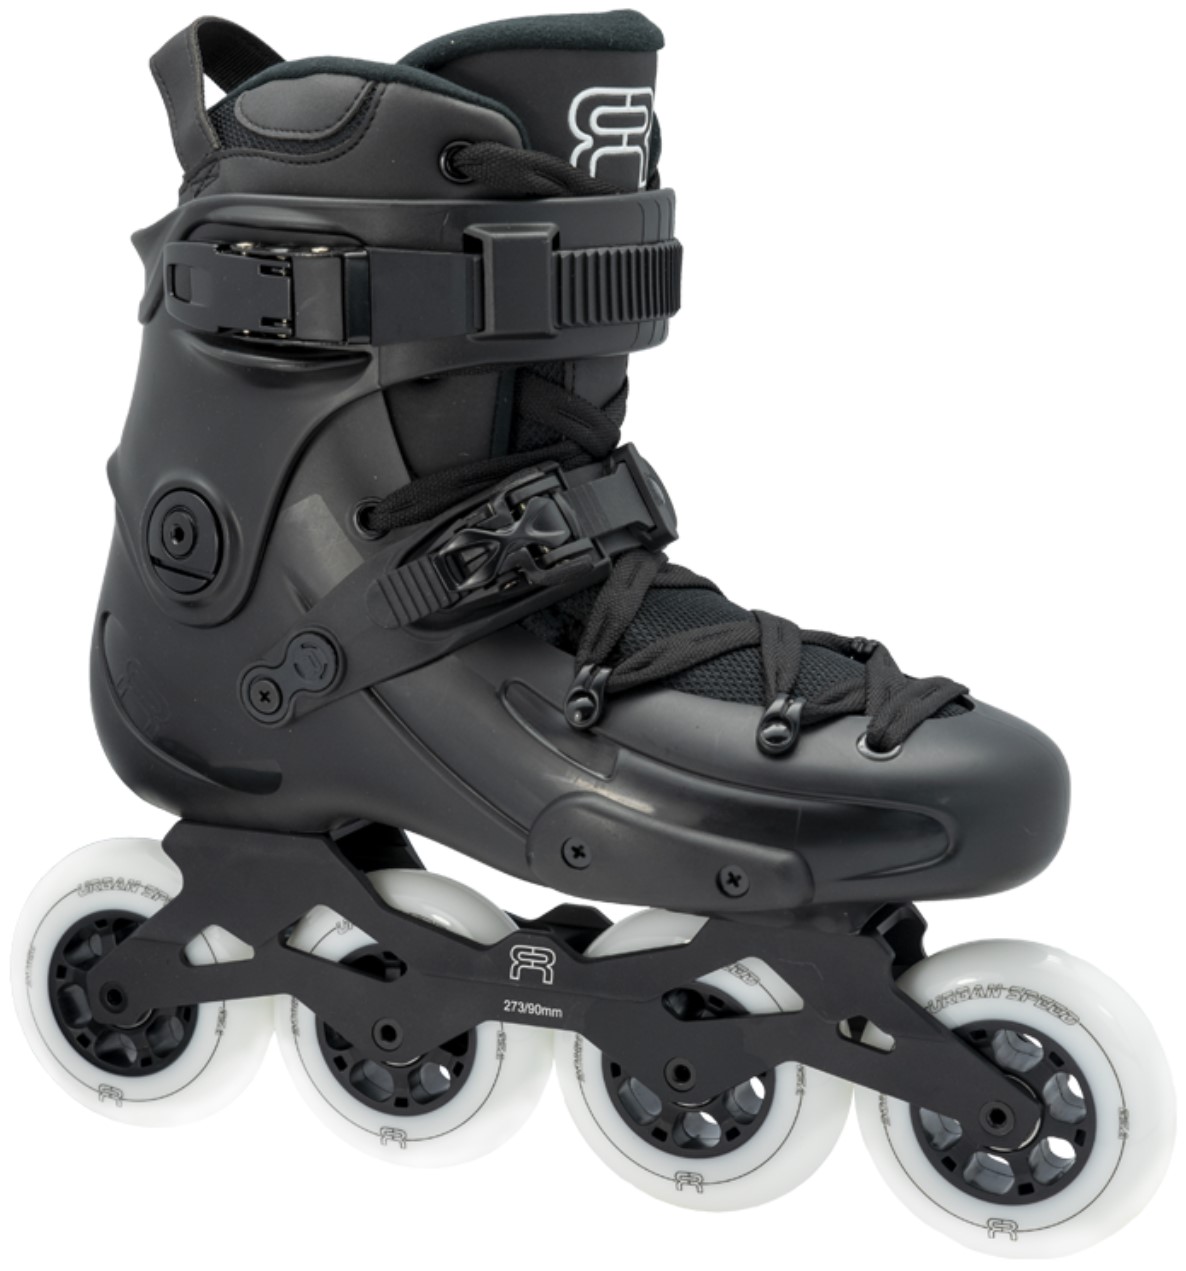 FR1 90 Black, the FR inline skate that is suitable for fitness because of its setup with four wheels of 90 mm